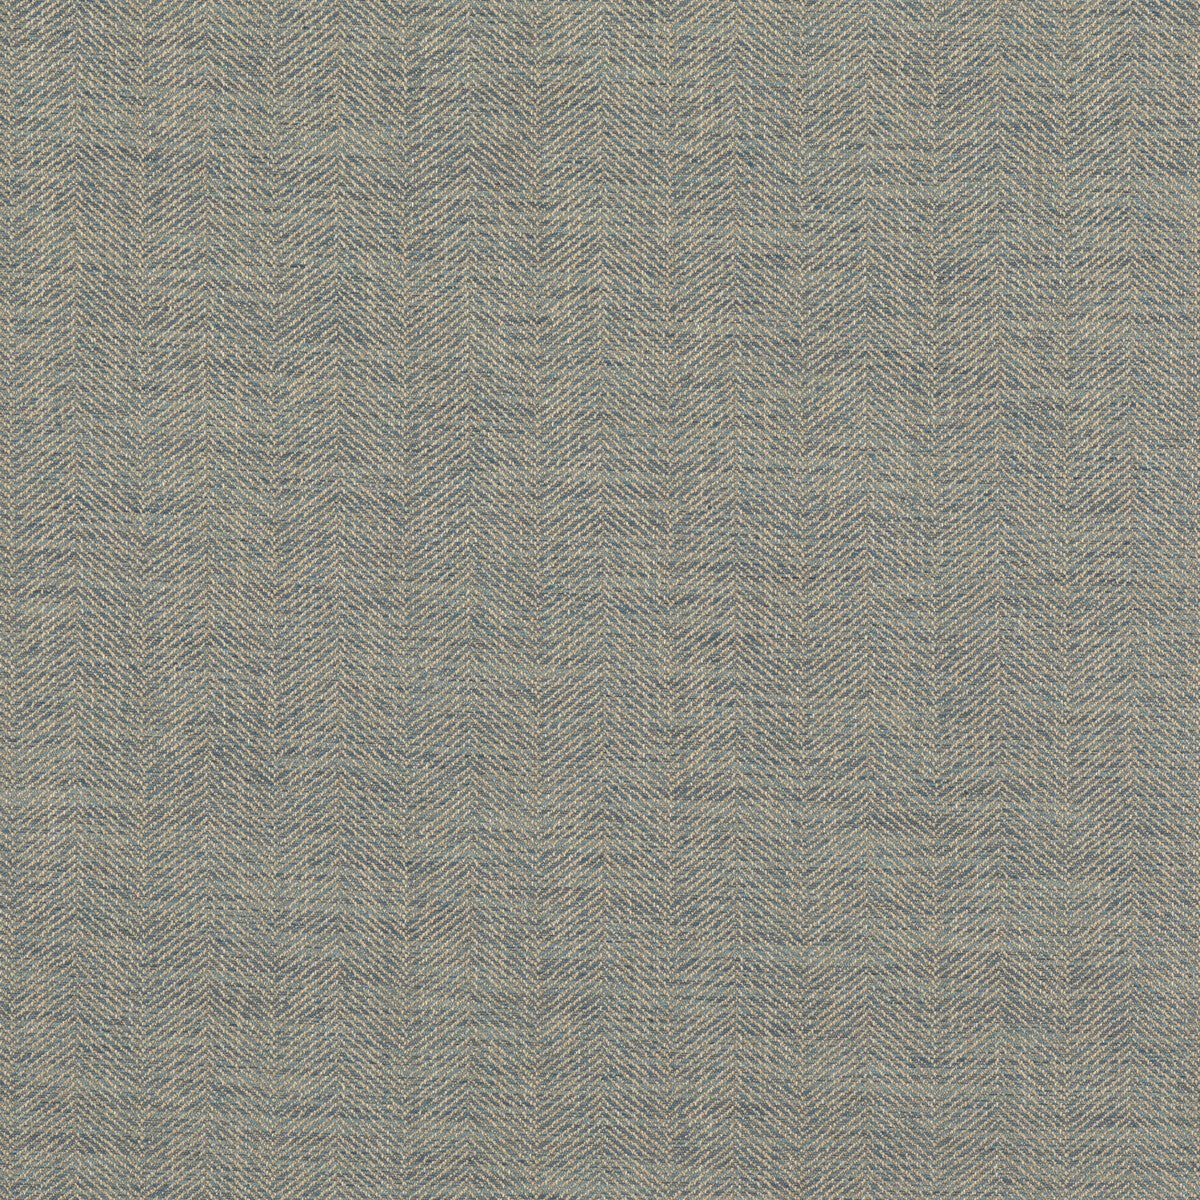 Grand Canyon fabric in soft blue color - pattern BF10878.605.0 - by G P &amp; J Baker in the Essential Colours II collection